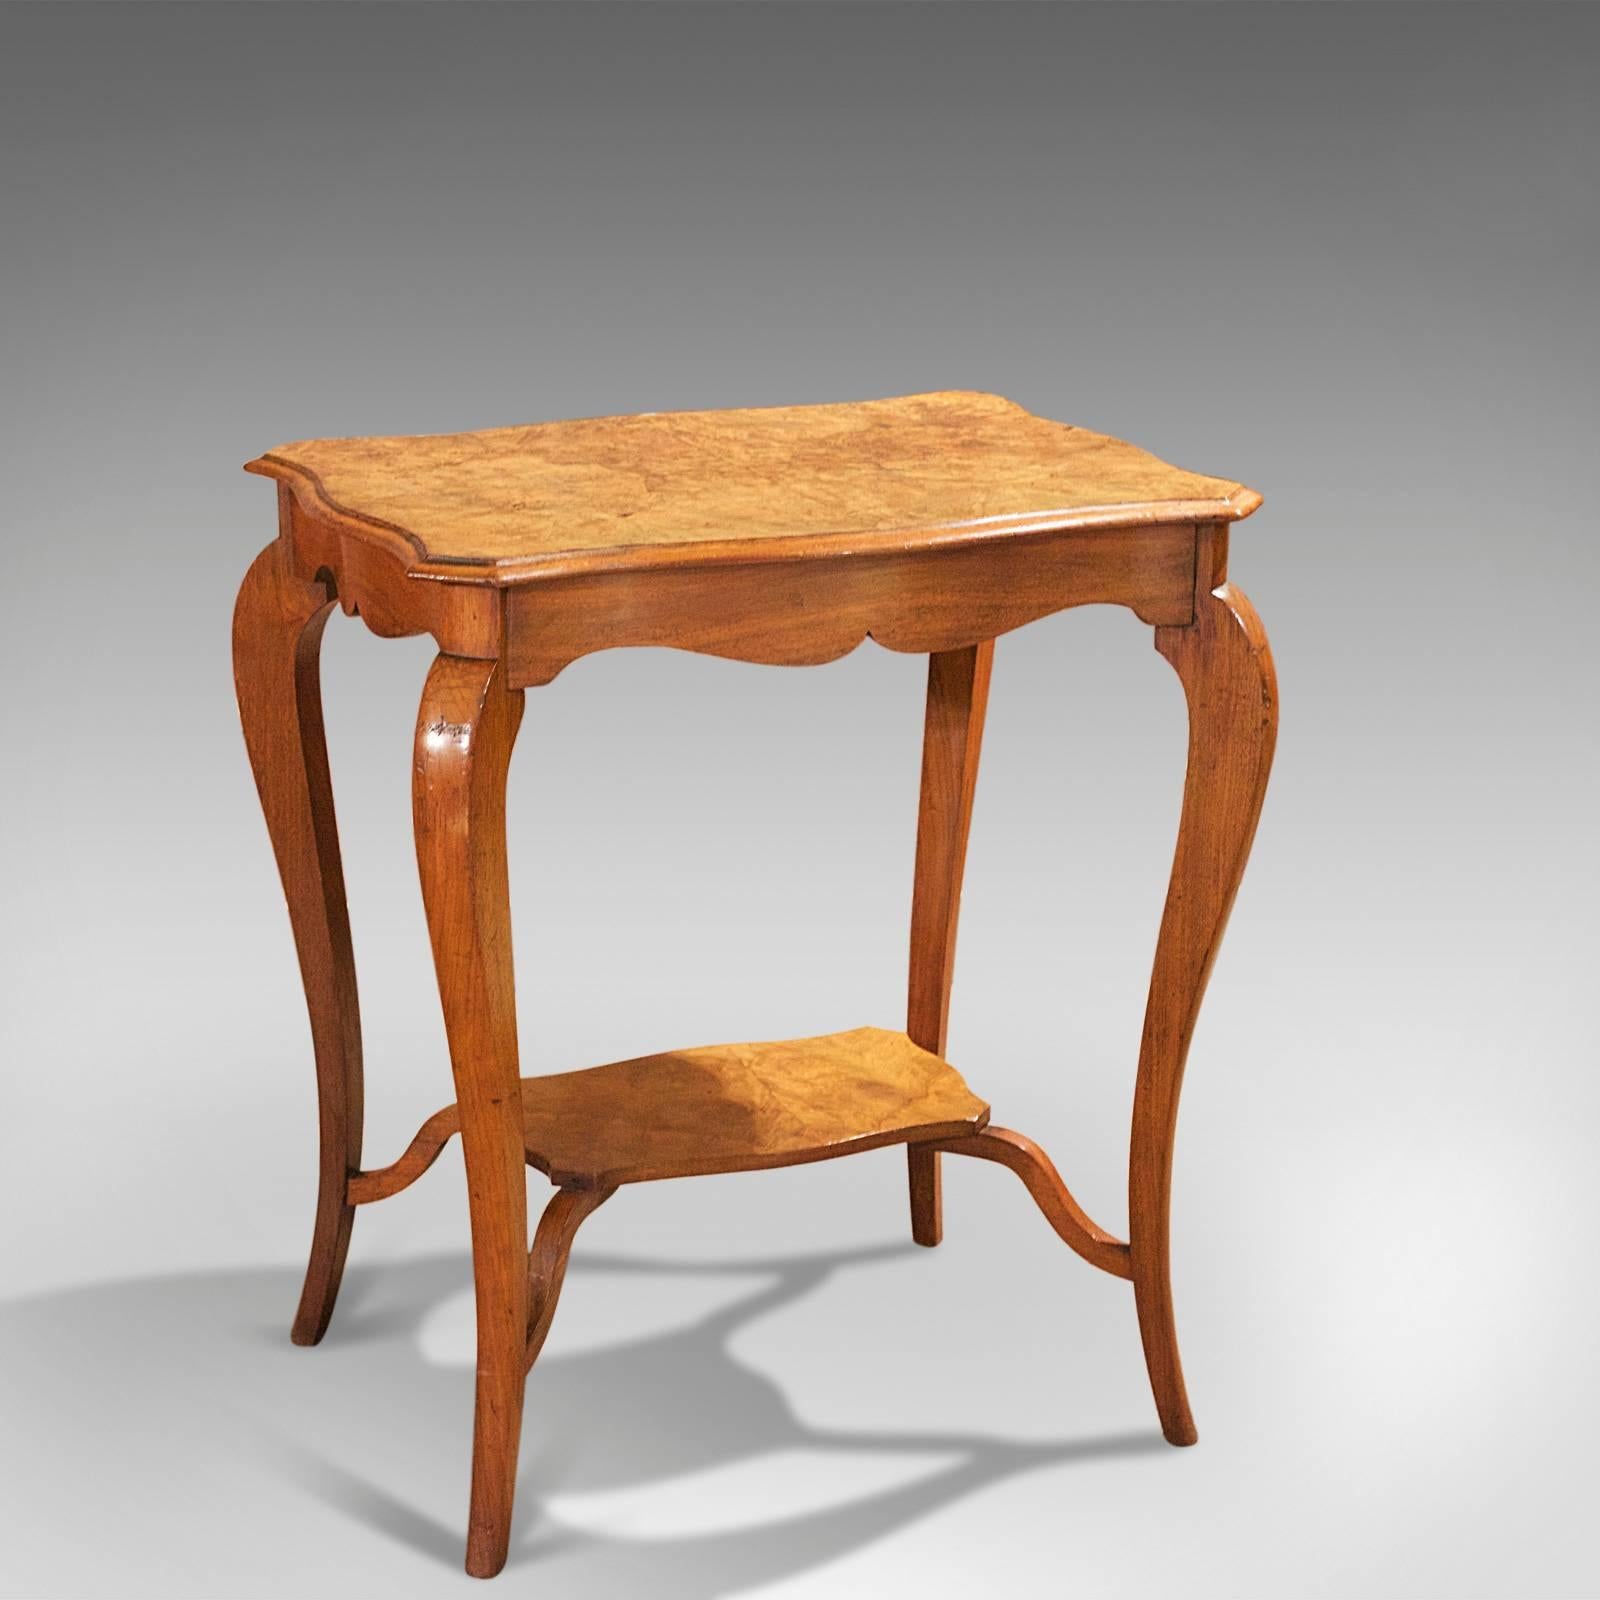 This is an antique side display table dating to circa 1900.

The top of this elegant table is quarter veneered in burr walnut with a moulded edge to the curved form with clipped corners.

The sinuous mahogany frame features tapered, cabriole legs